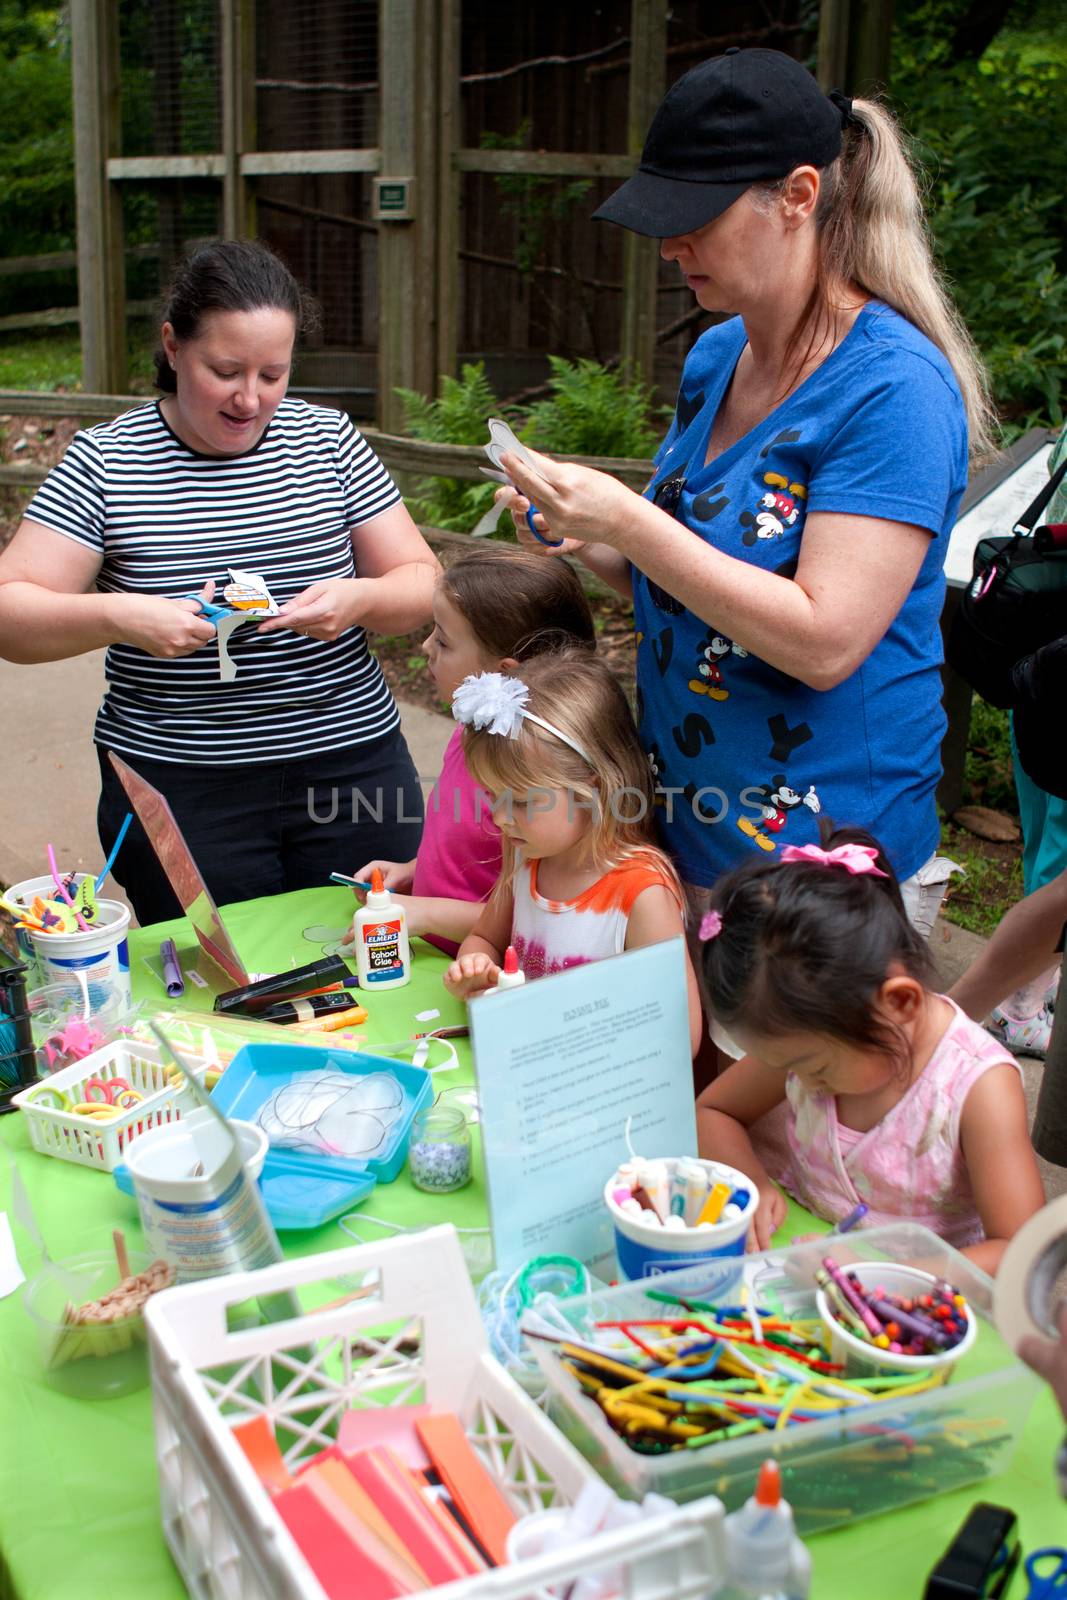 Parents Help Kids With Arts And Crafts Project At Festival by BluIz60